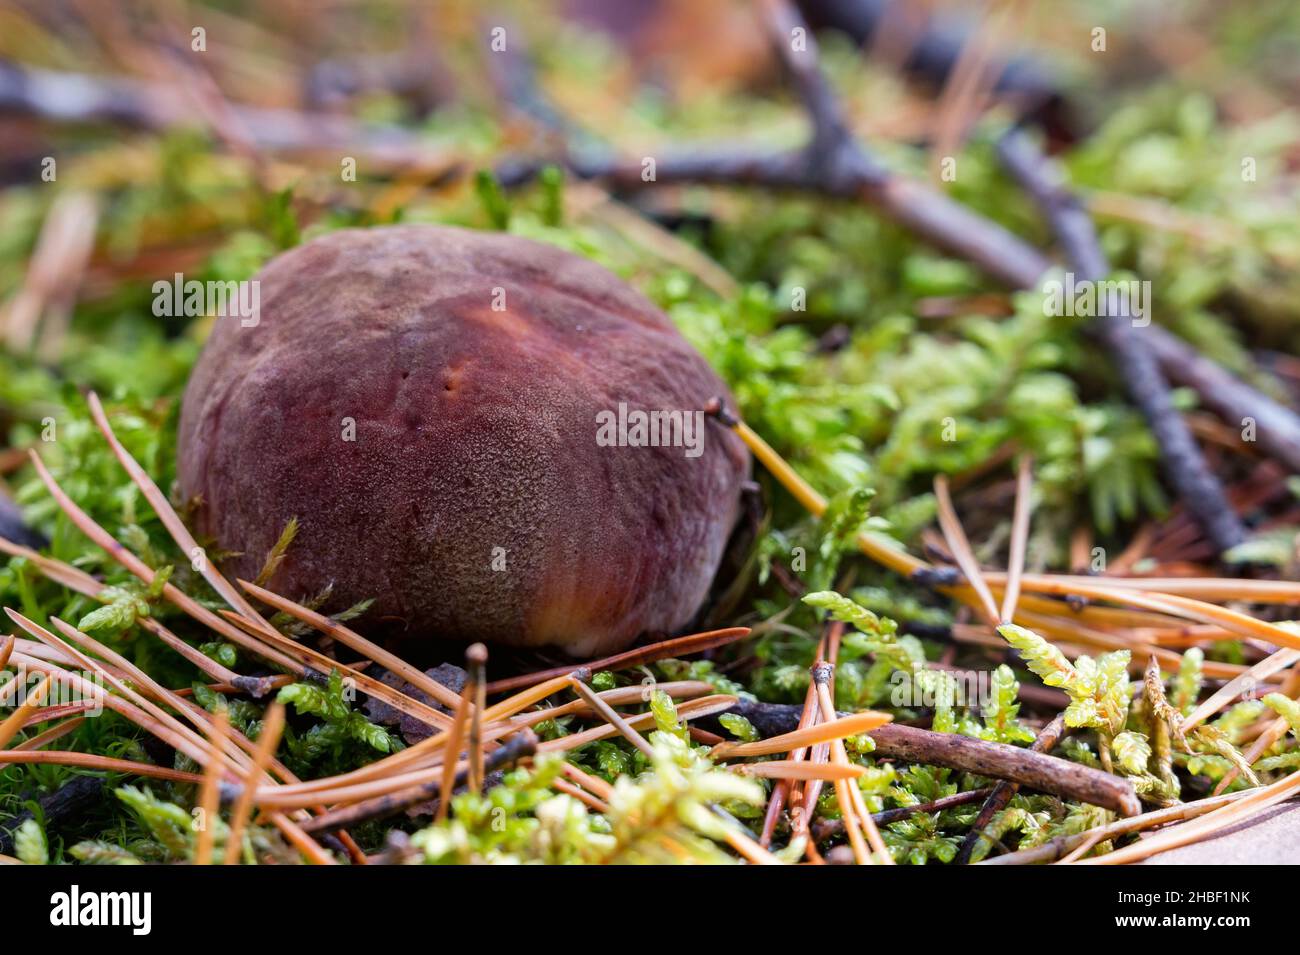 Close view of Boletus mushroom hiding in the forest on the ground. It is edible. Contains such members as Boletus edulis and Boletus aereus and Boletu Stock Photo